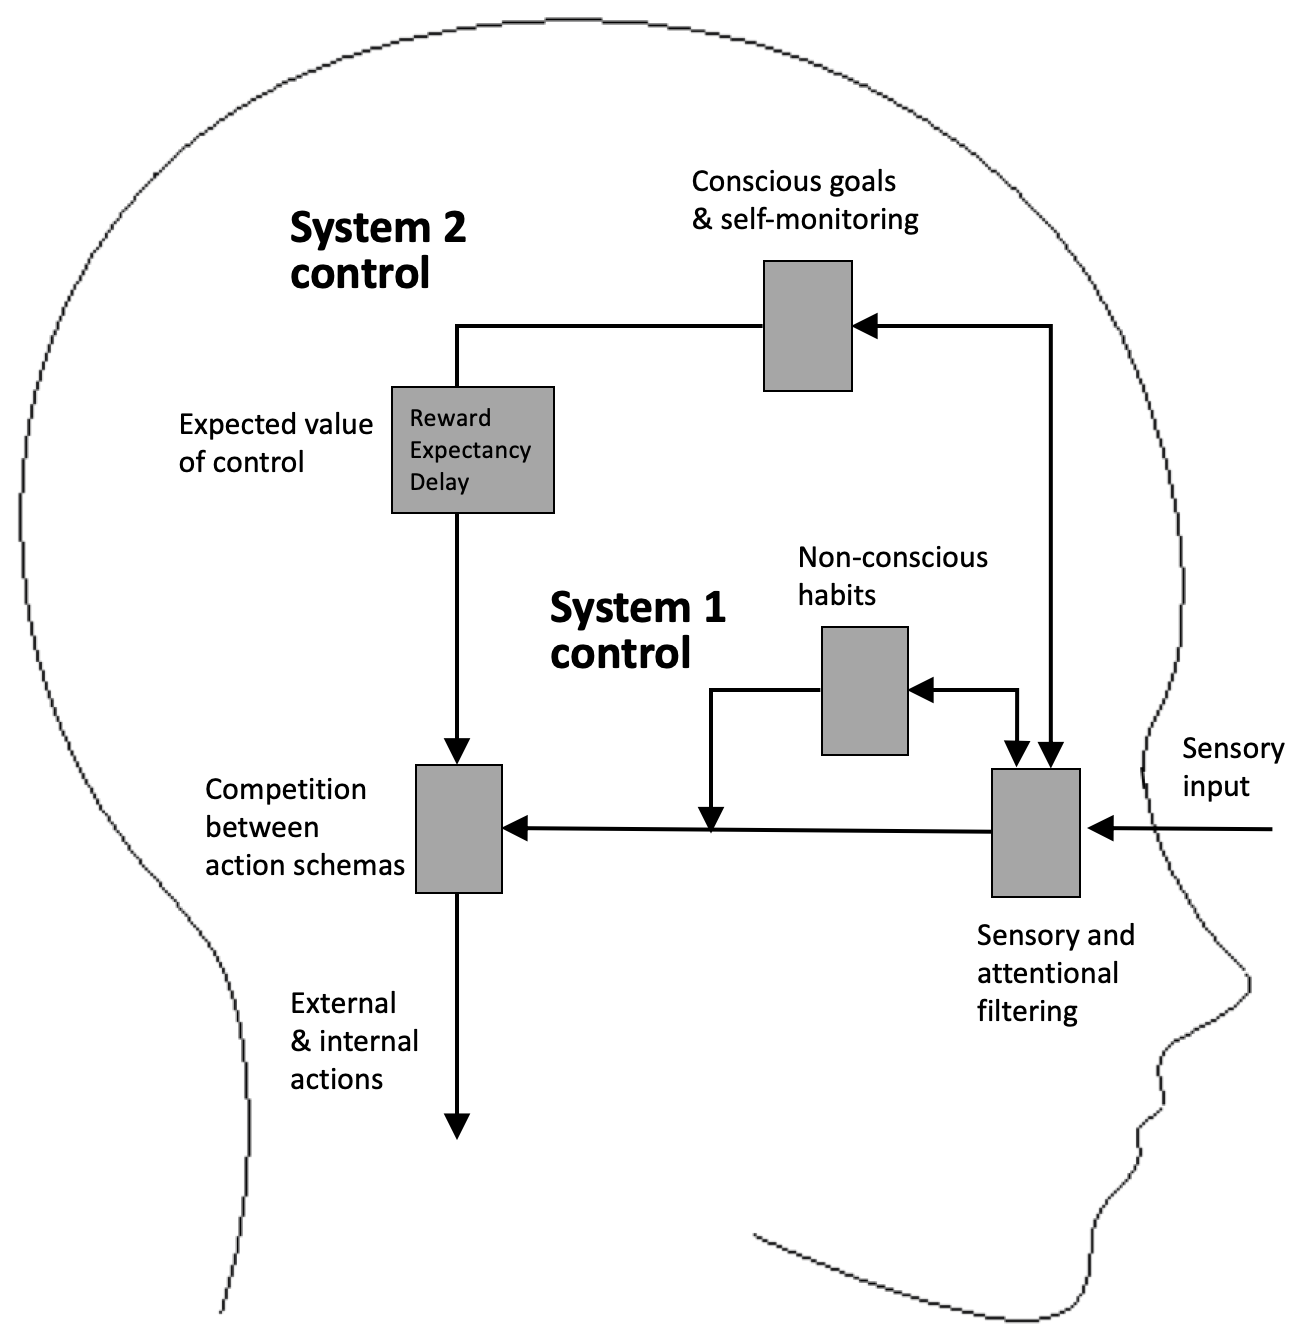 An extended dual systems model of self-regulation, developed from Shea et al. (Shea et al. 2014) and Norman & Shallice (Norman and Shallice 1986). System 1 control is rapid and non-conscious, whereas System 2 control is slower, conscious, and capacity-limited. The strength of System 2 control is mediated by the expected value of control.